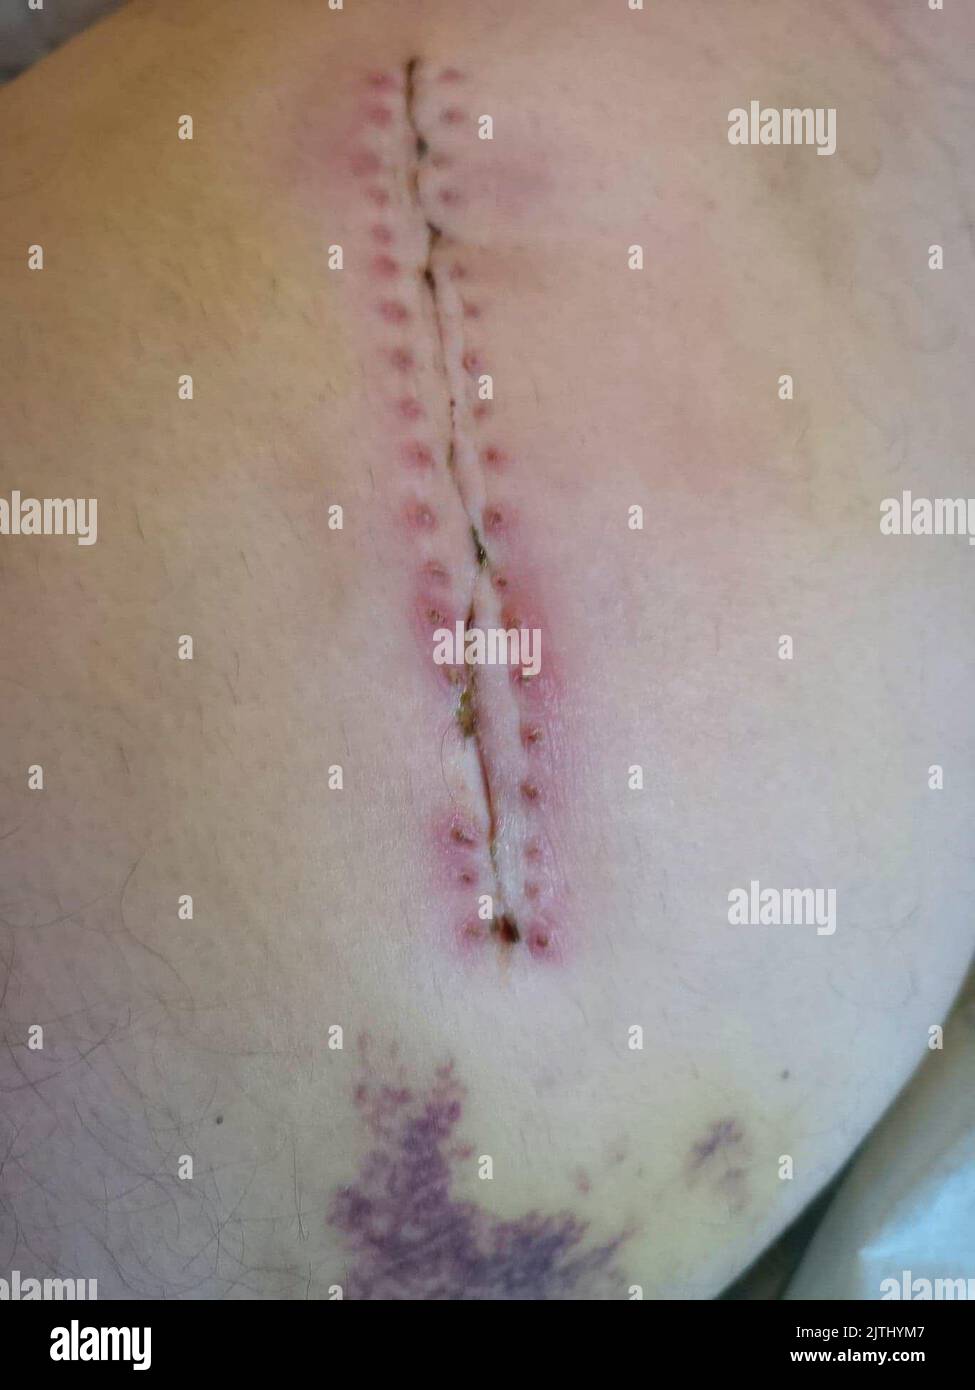 Will it hurt when my stitches are removed after surgery? (Video)